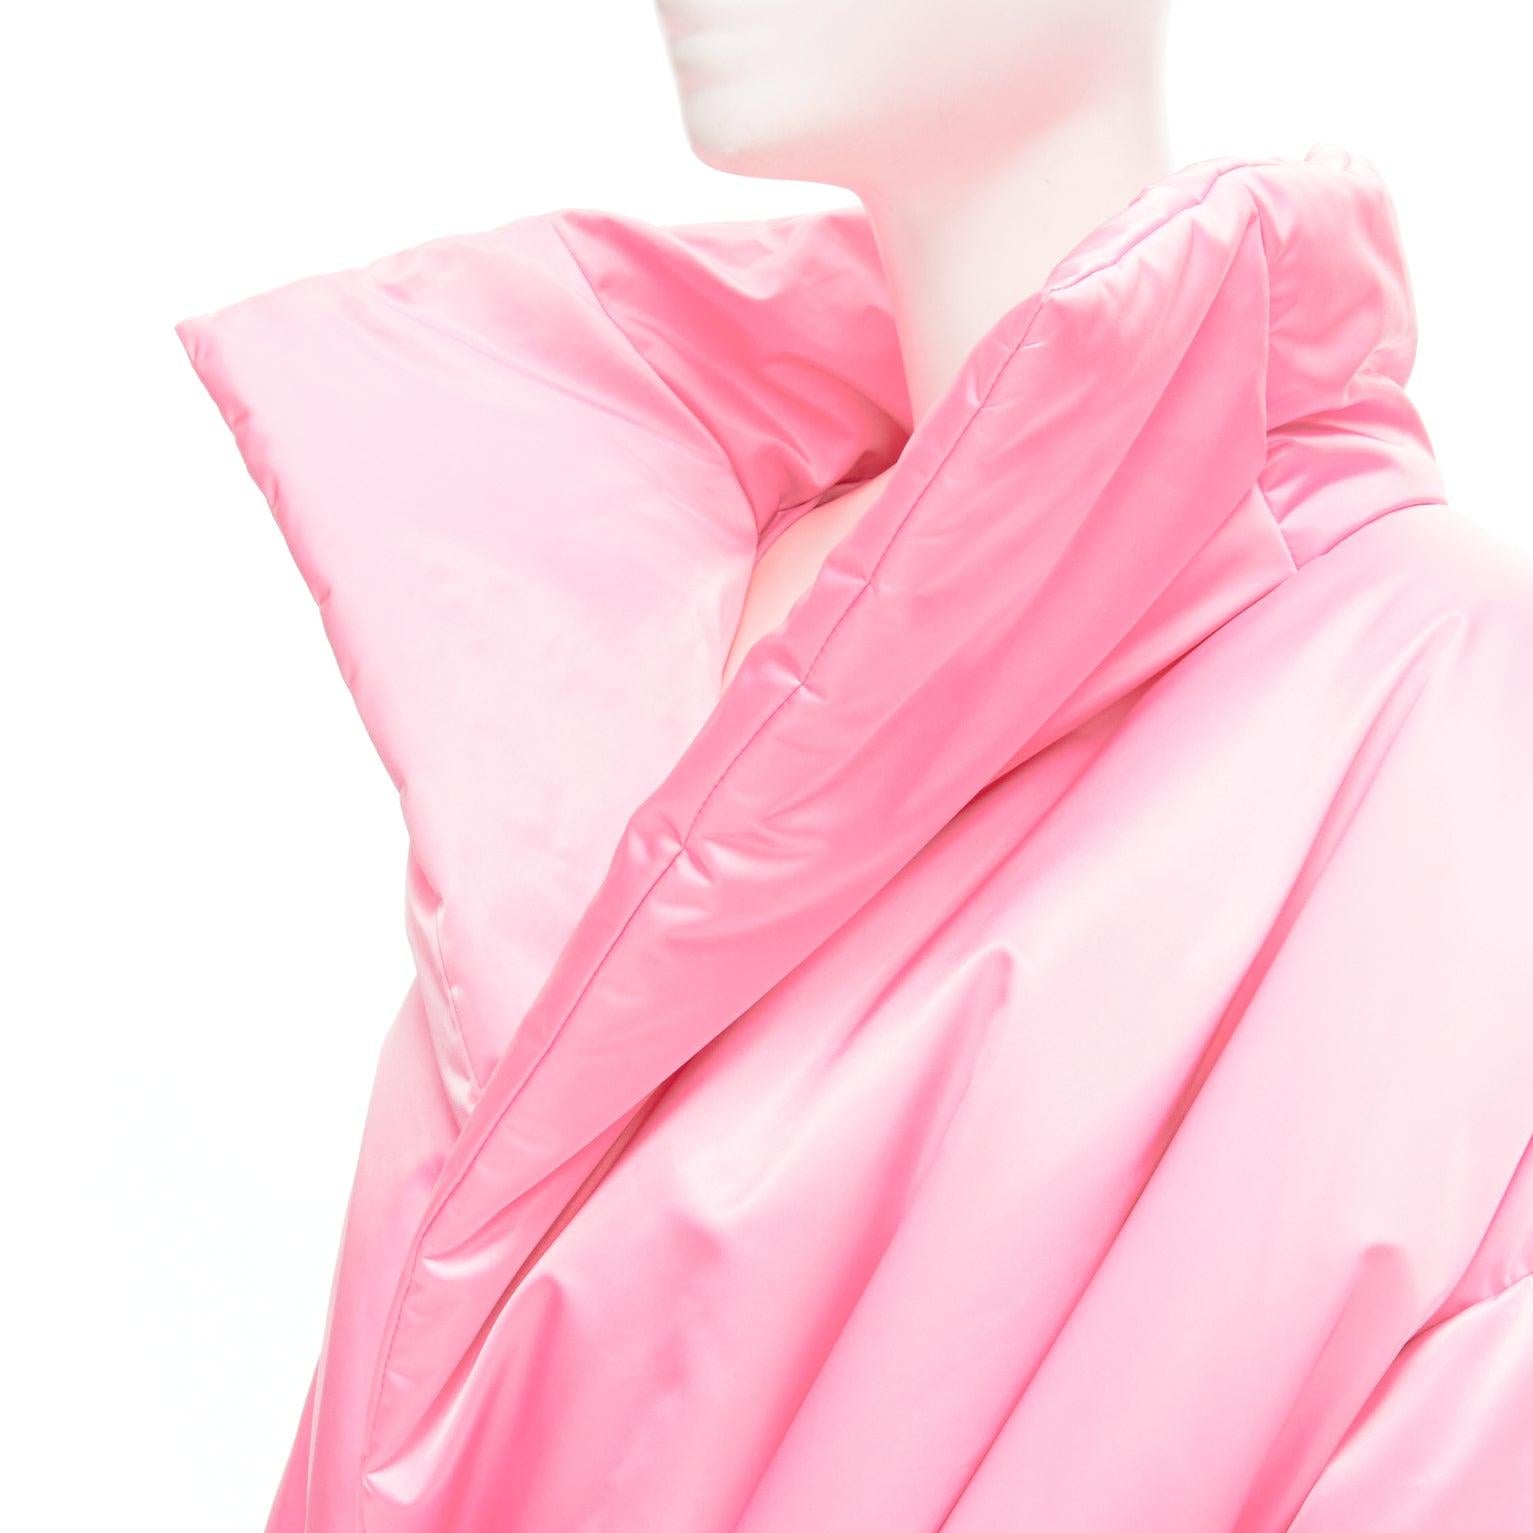 new BALENCIAGA Demna Runway pink nylon satin belted padded puffer coat robe S
Reference: TGAS/C00453
Brand: Balenciaga
Designer: Demna
Collection: 2019 - Runway
As seen on: Ariana Grande
Material: Polyester
Color: Pink
Pattern: Solid
Closure: Self